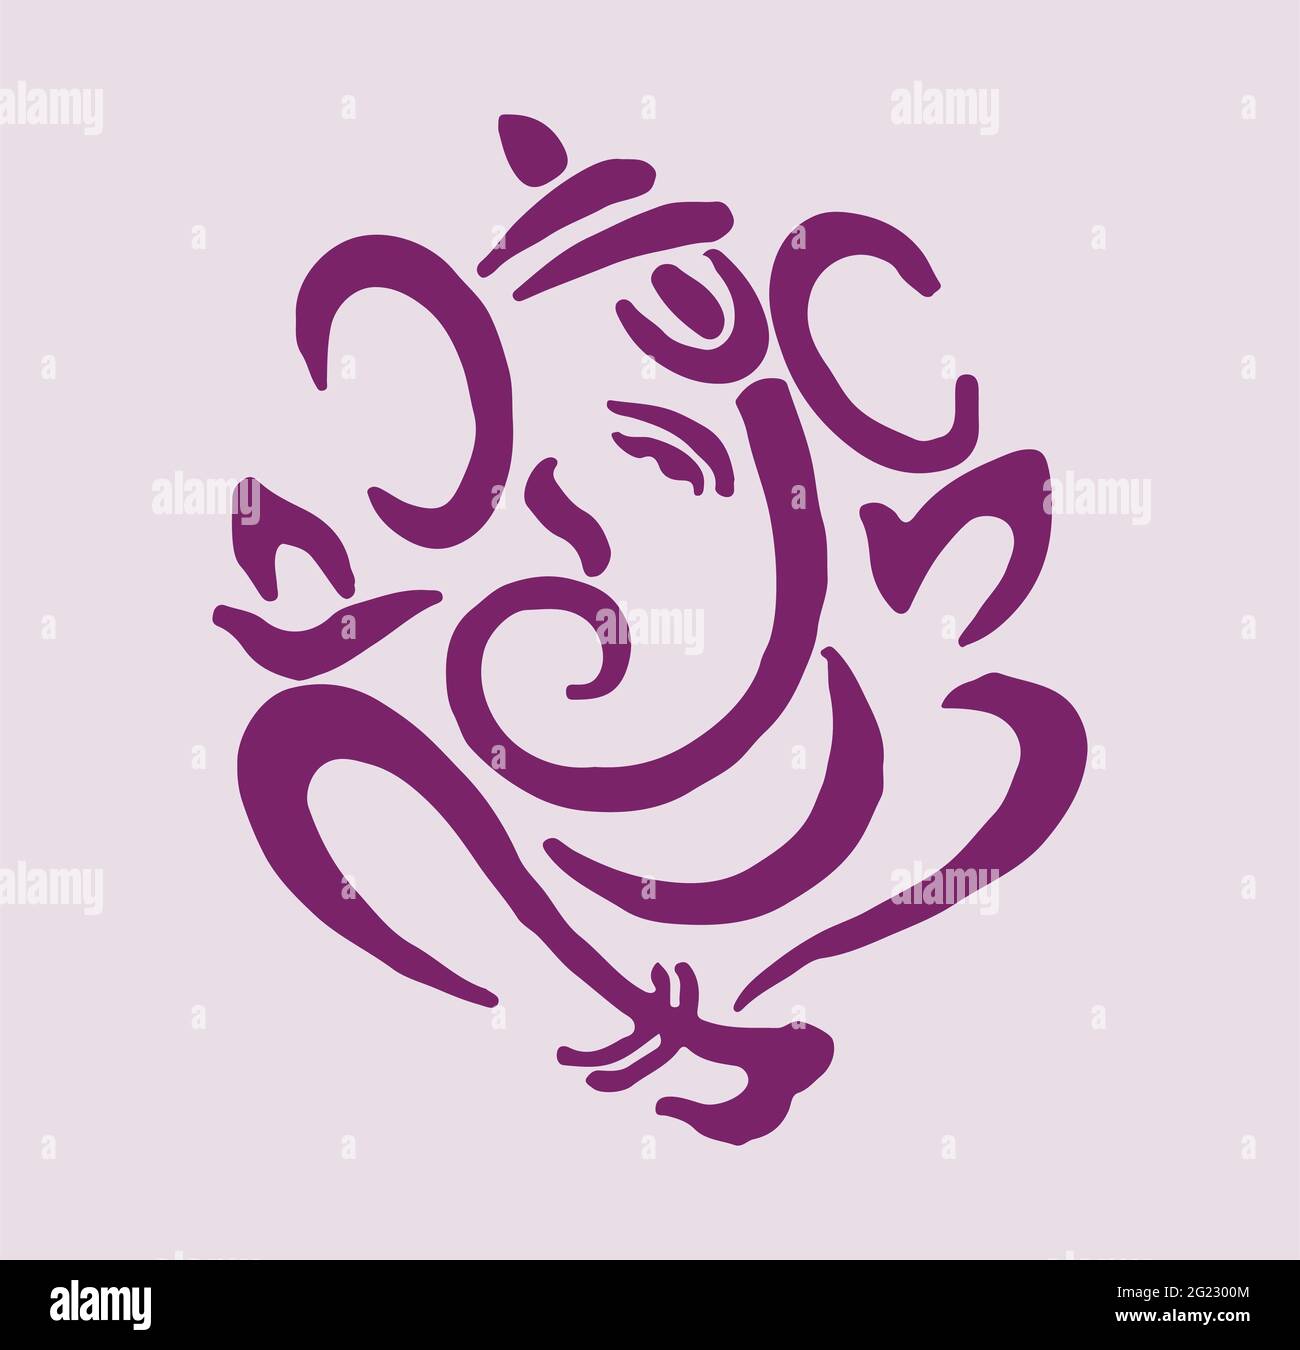 Drawing or sketch of the face of Lord Ganesha isolated on a purple bacjground Stock Photo